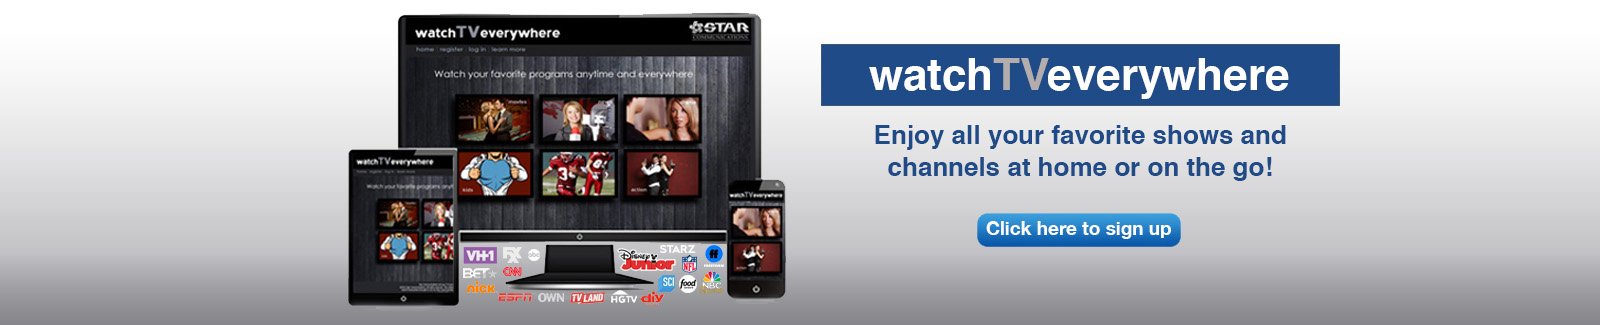 Watch TV Everywhere sign up page